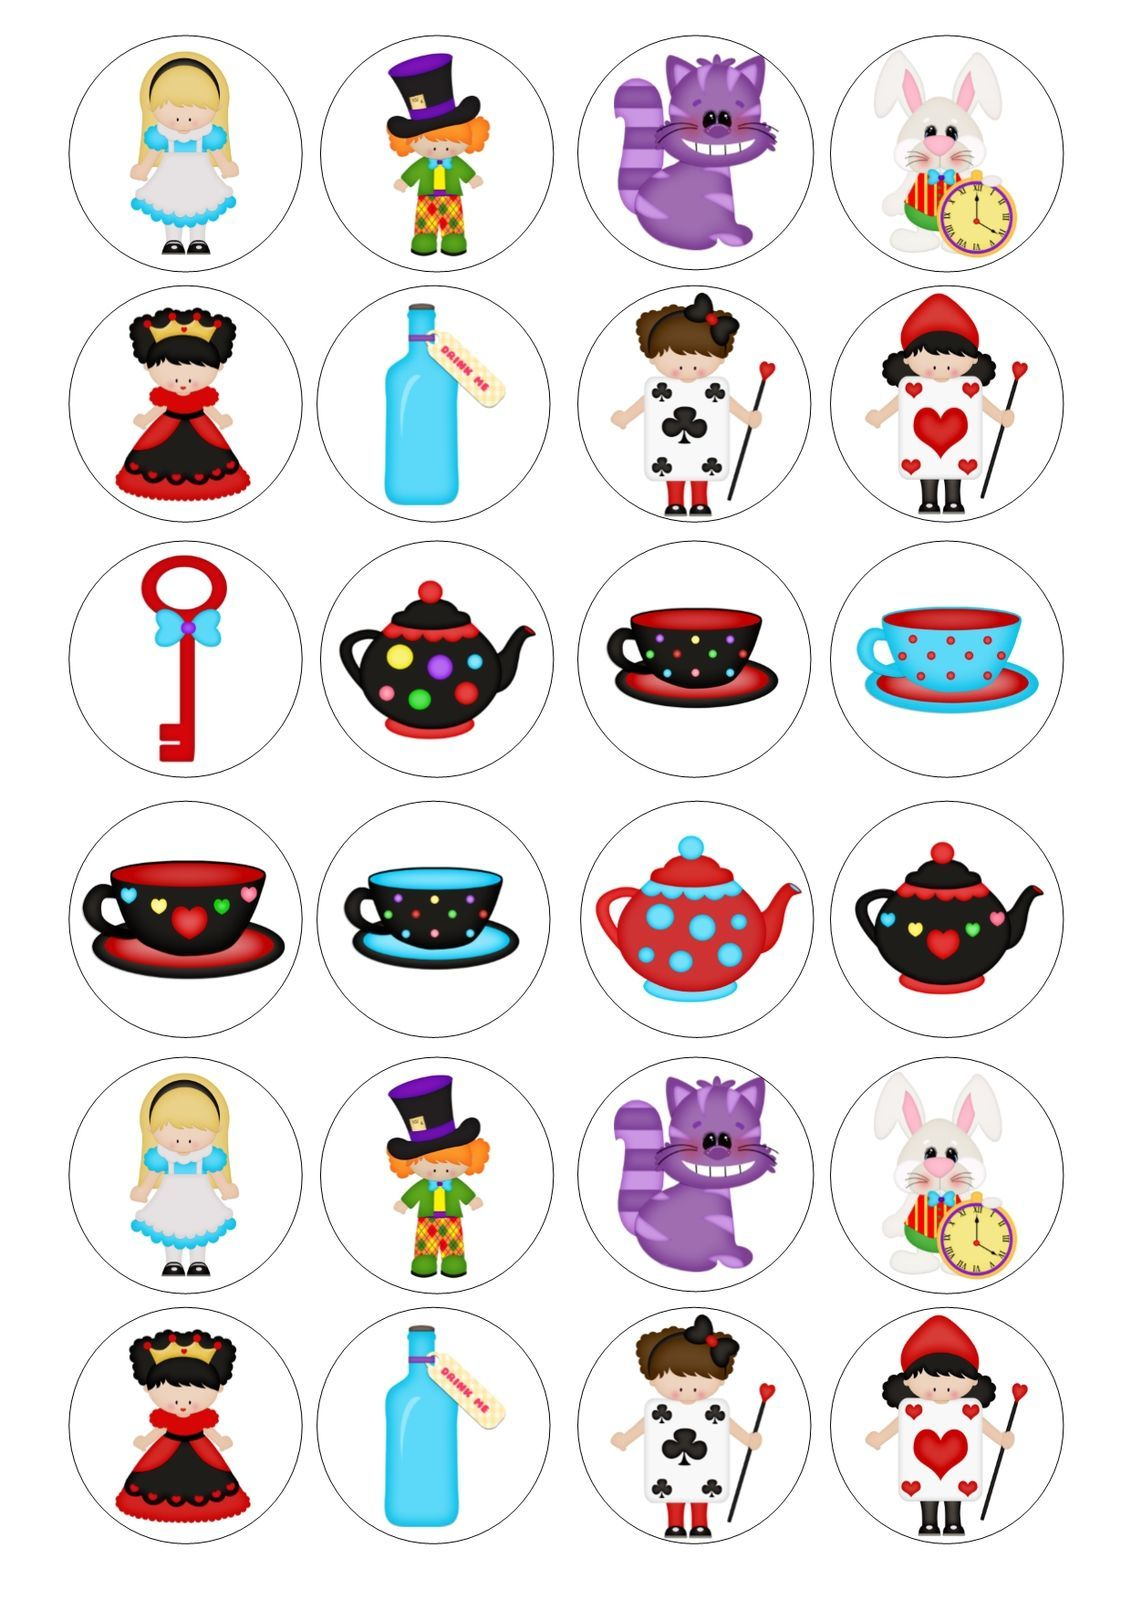 Alice In Wonderland Tea Party Cupcake Toppers with Alice In Wonderland Cupcake Toppers Free Printable